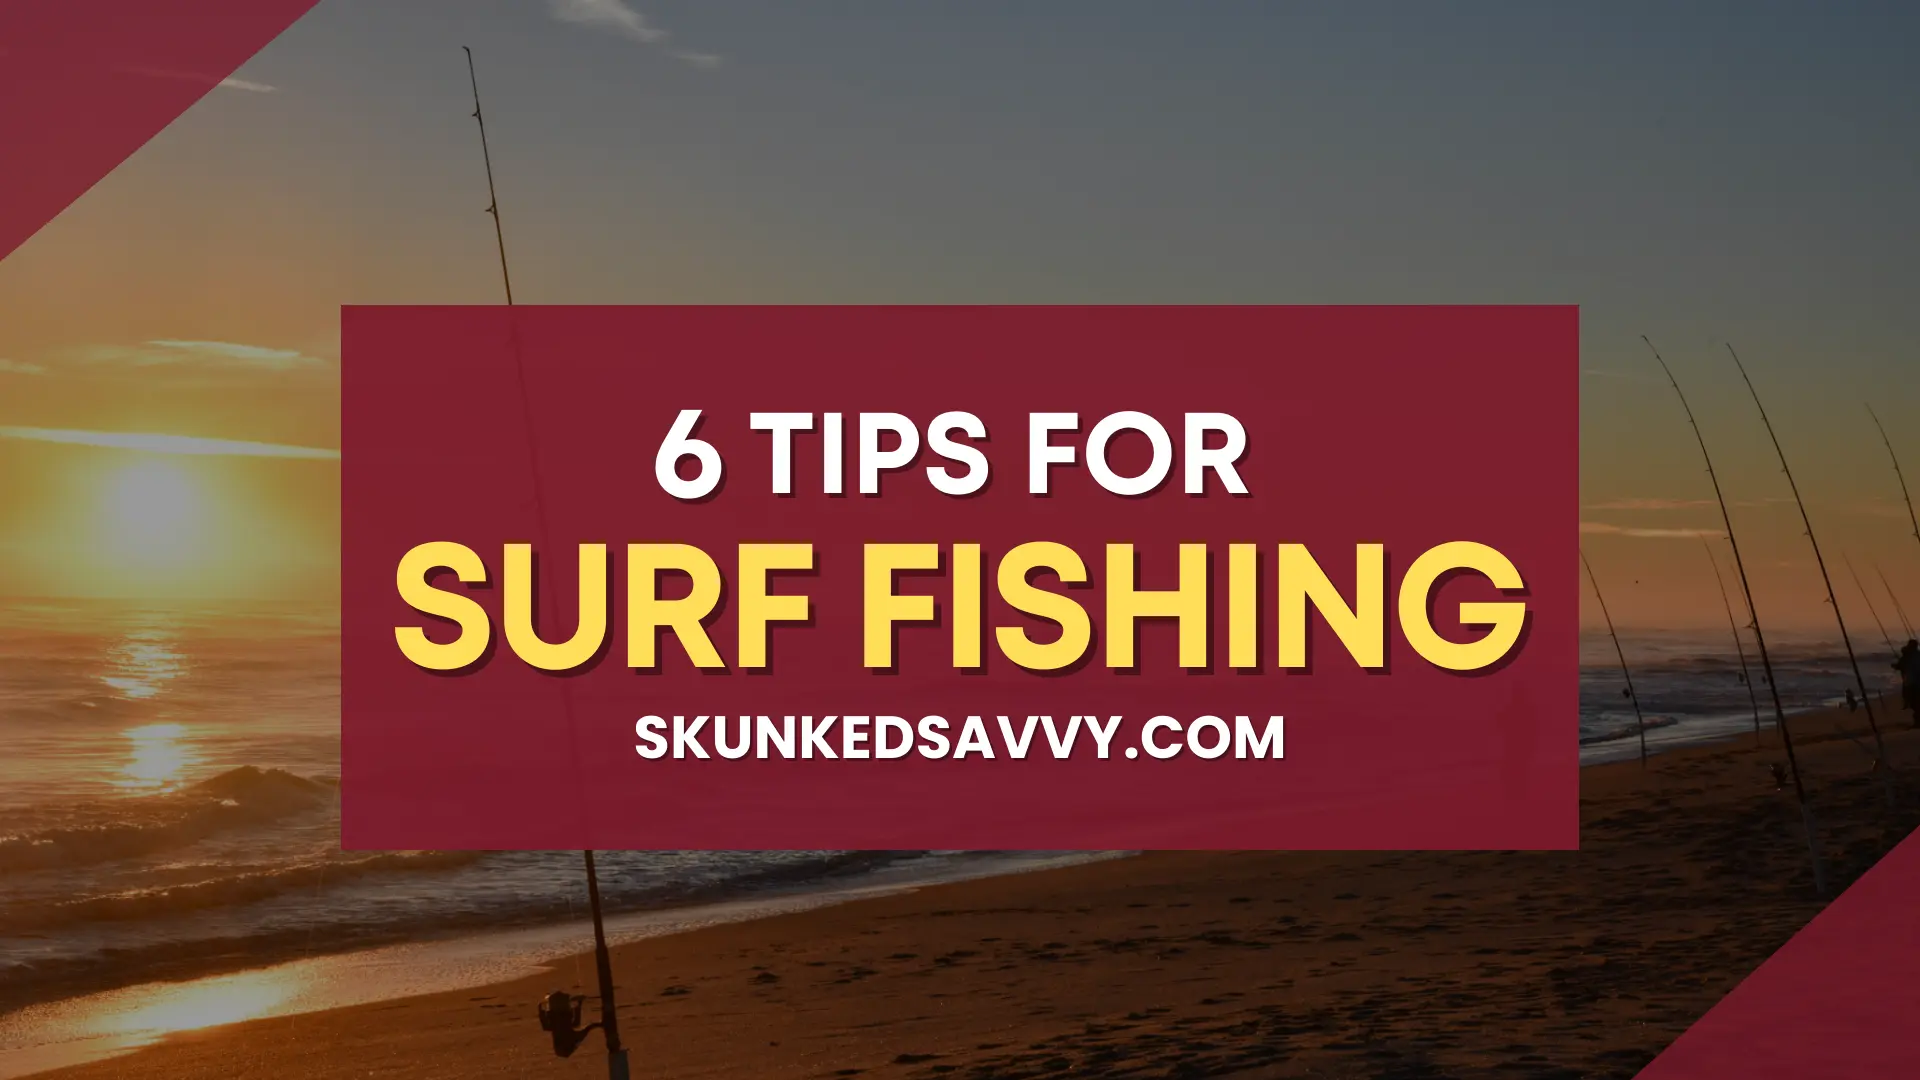 Tips for Surf Fishing